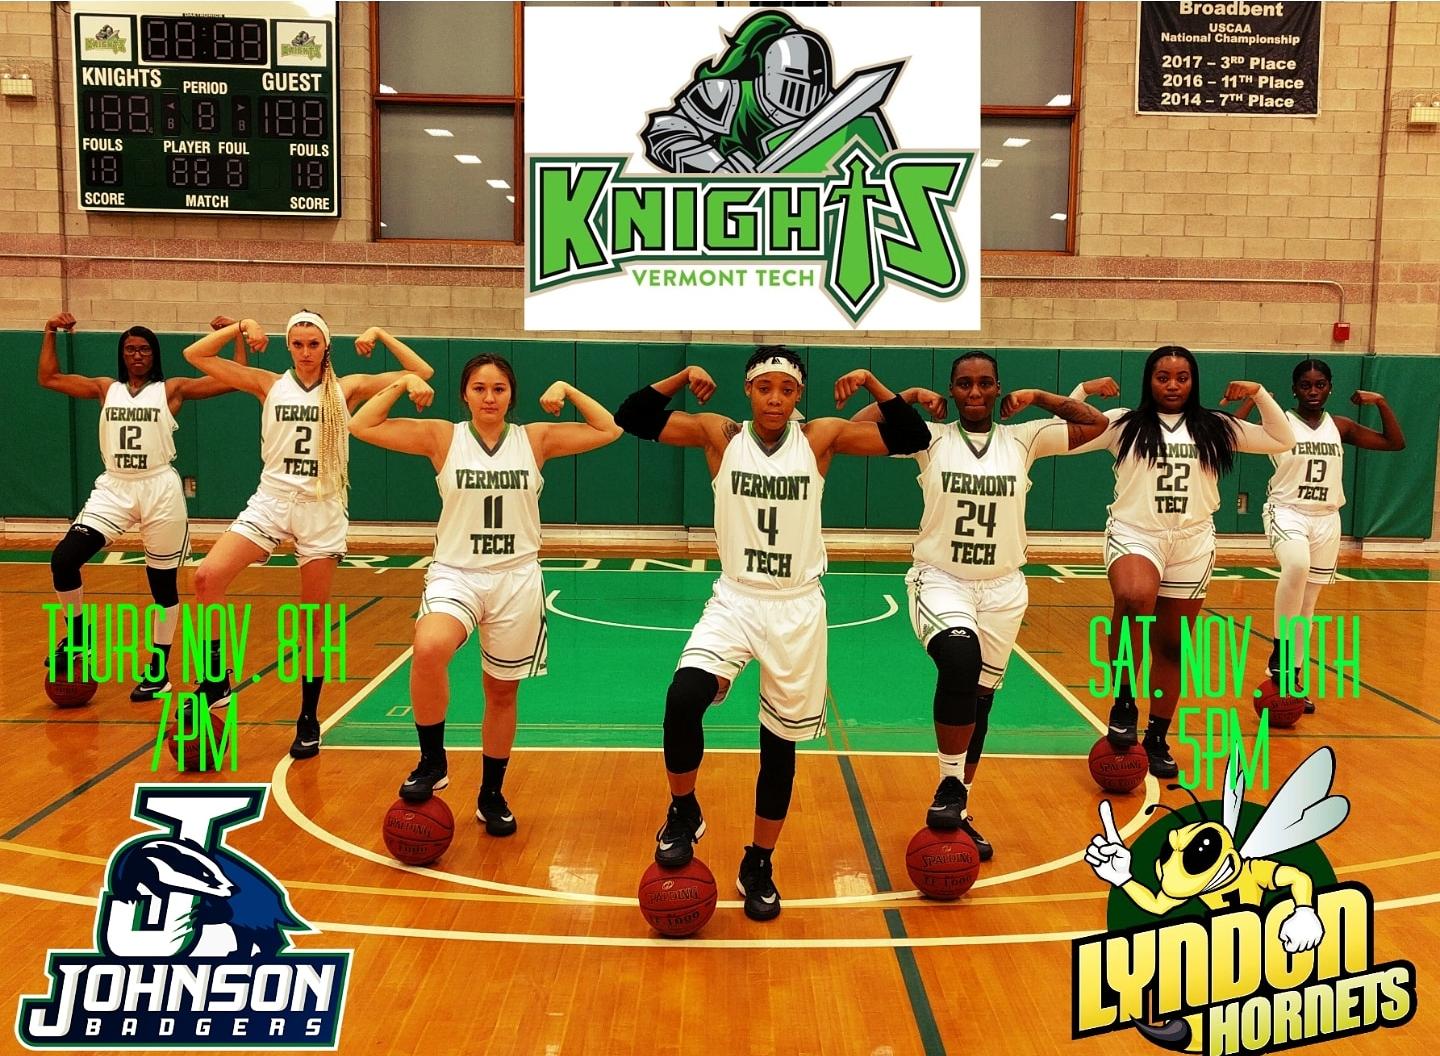 Lady Knights hold on to beat NVU-Johnson 81-72  at the Northern Vermont University Classic.